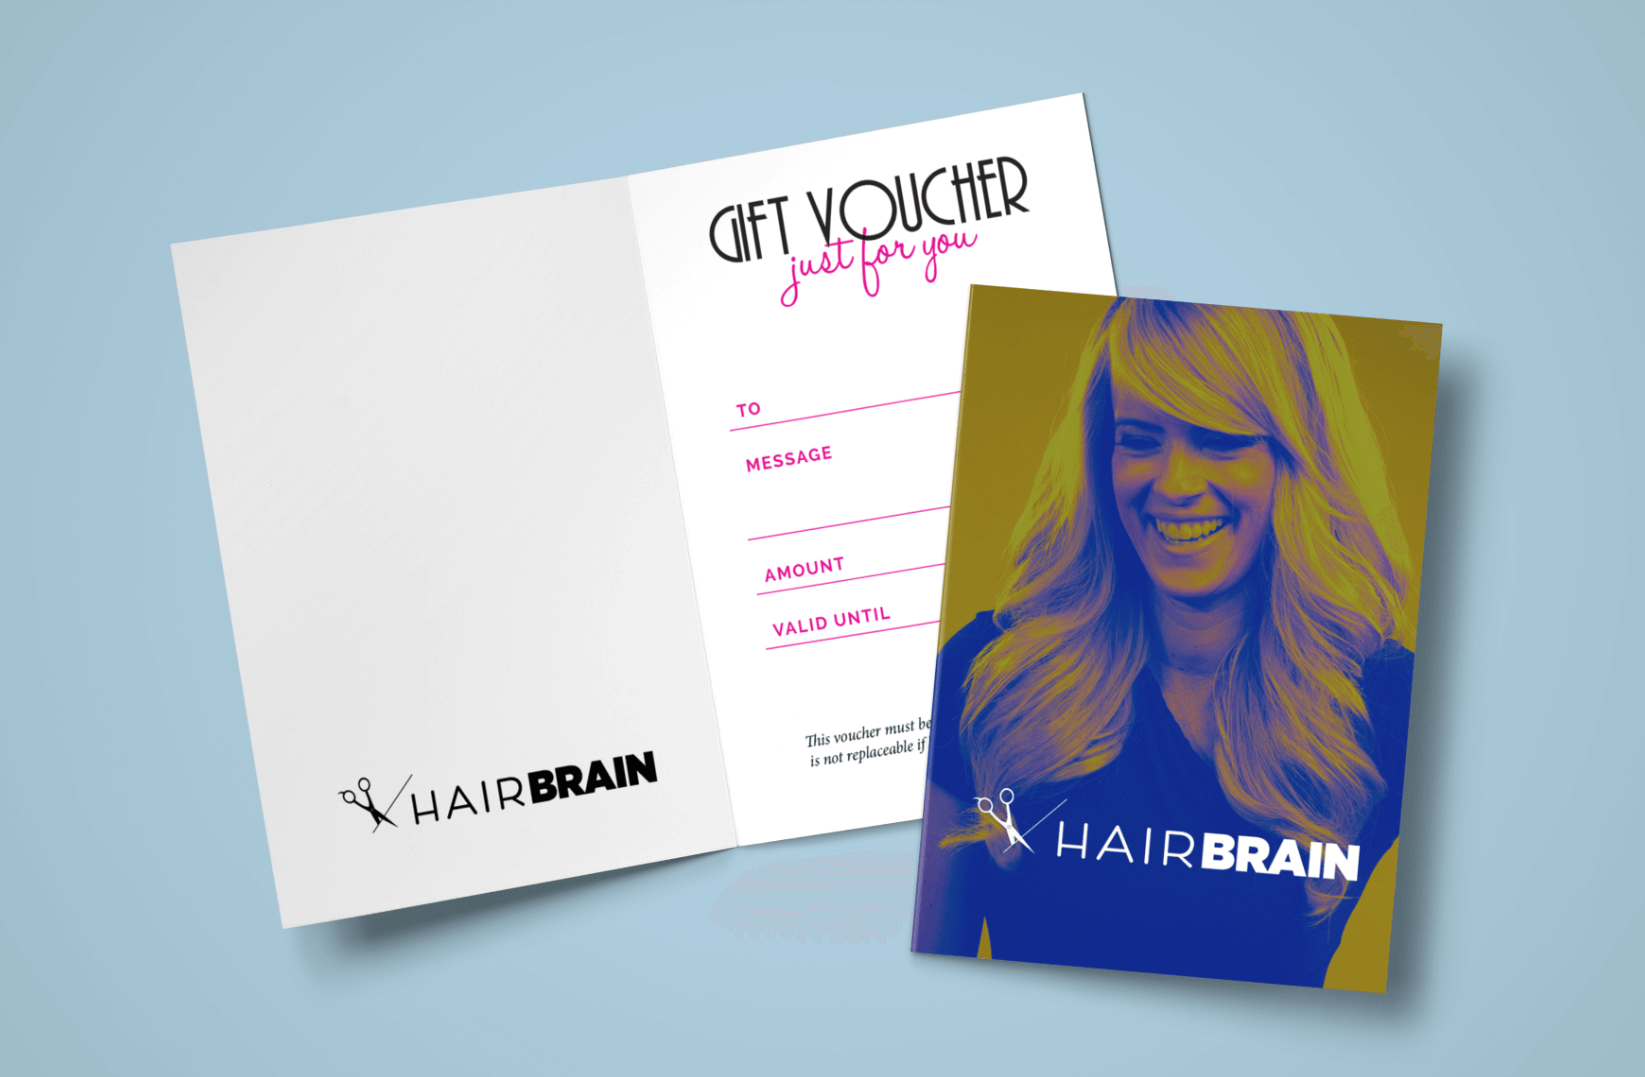 personalised gift vouchers & gift voucher printing from Print Ready Dublin